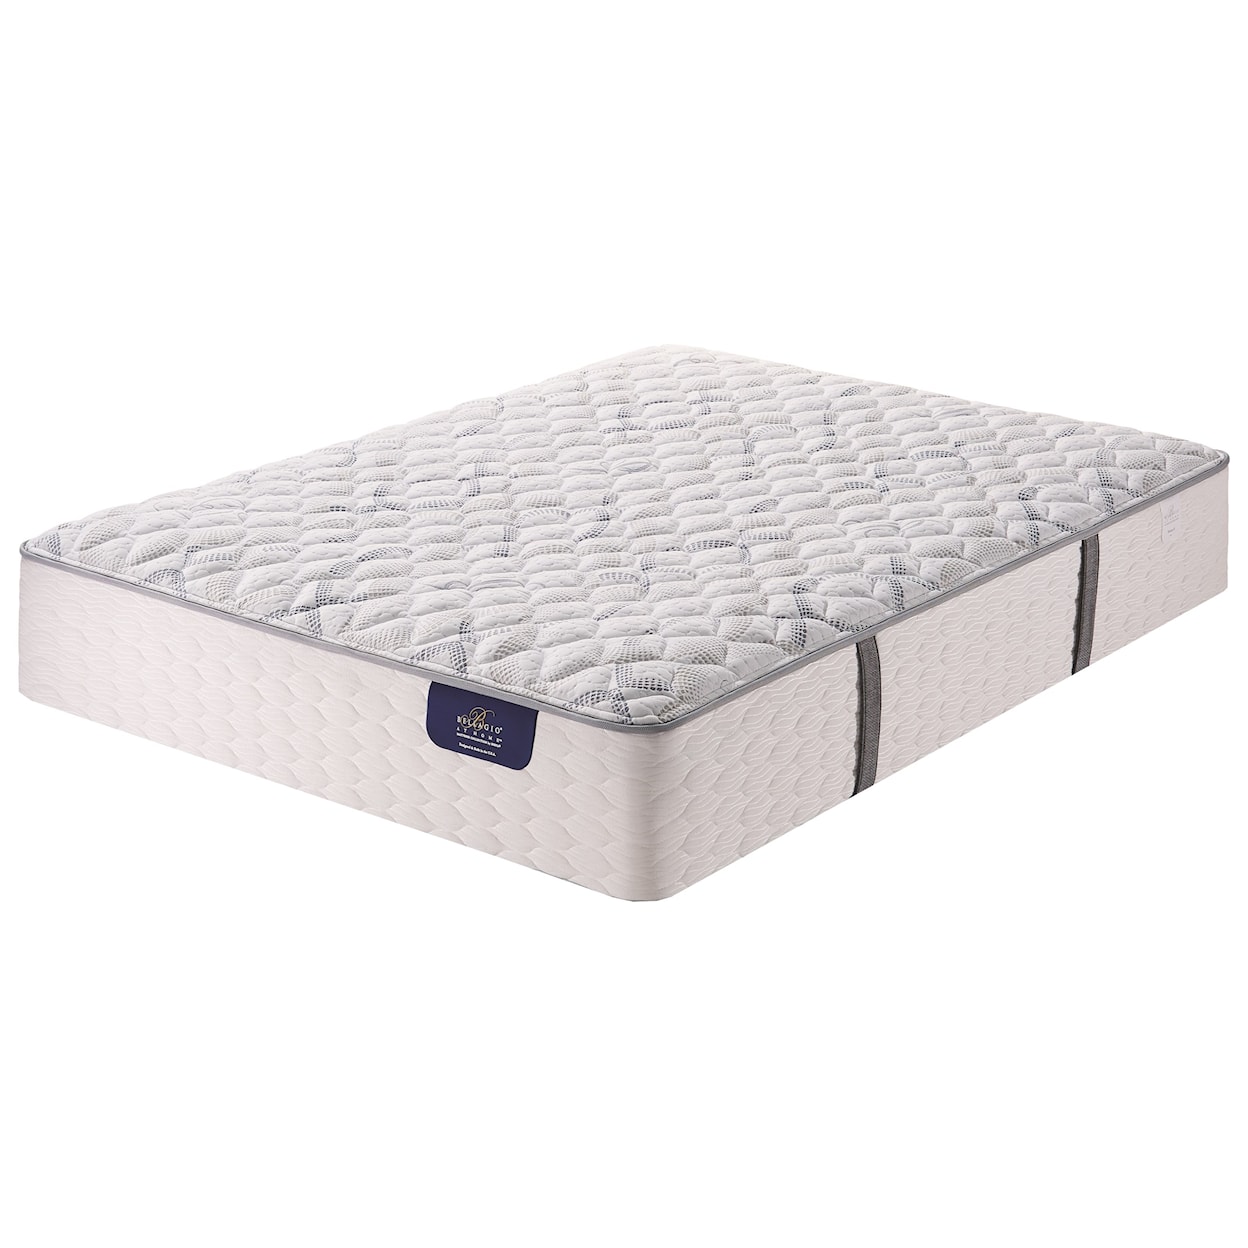 Serta Bellagio Briaza II Extra Firm Twin Extra Firm Pocketed Coil Mattress